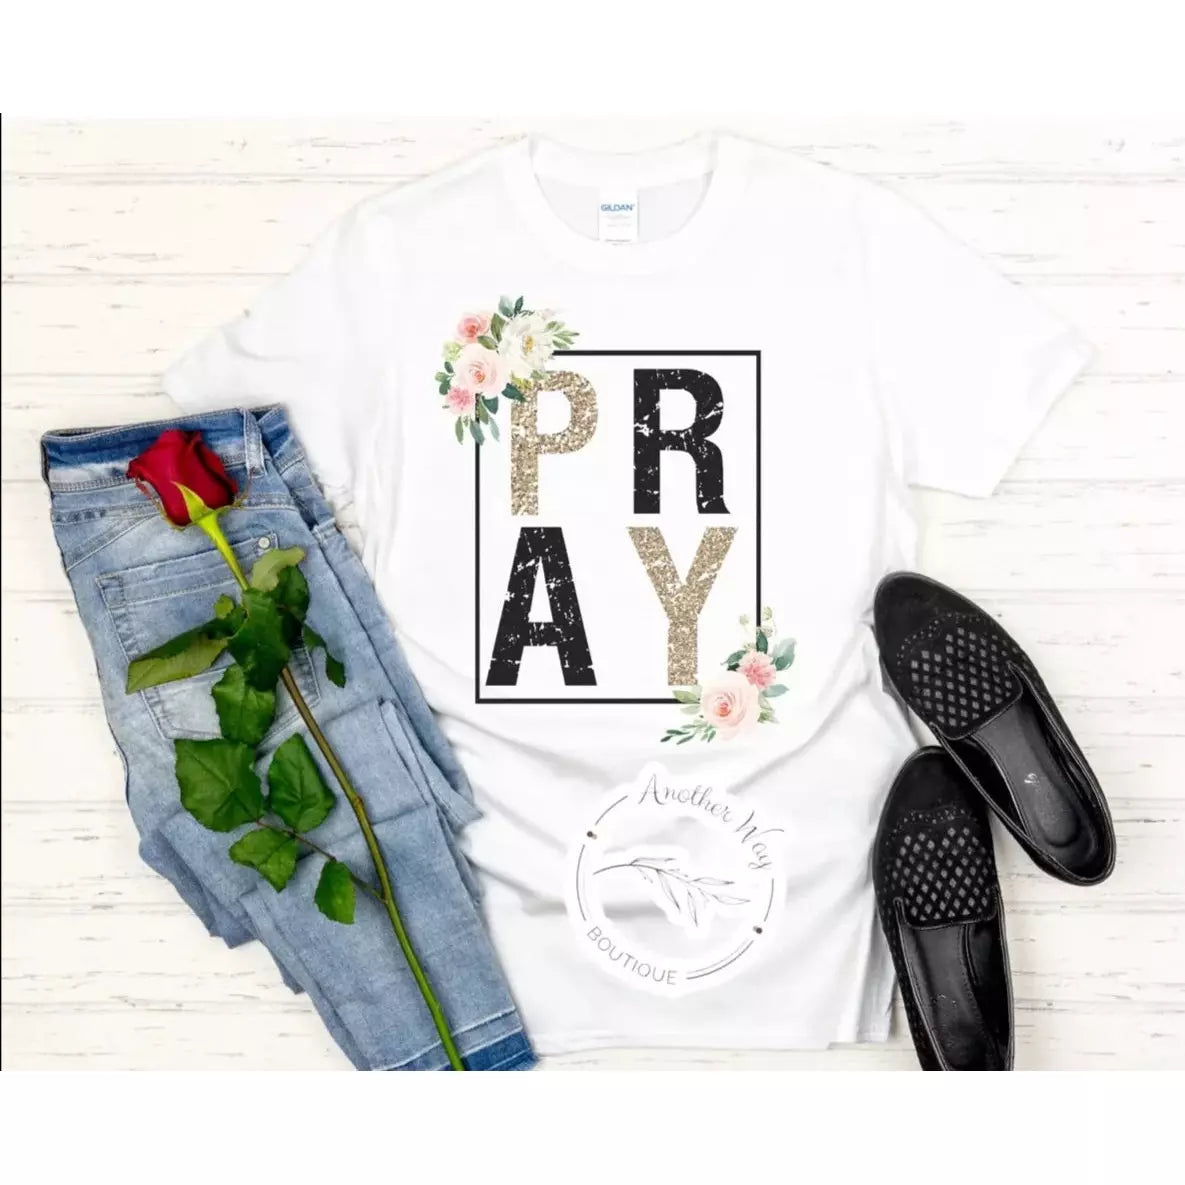 "Pray" - Another Way Boutique